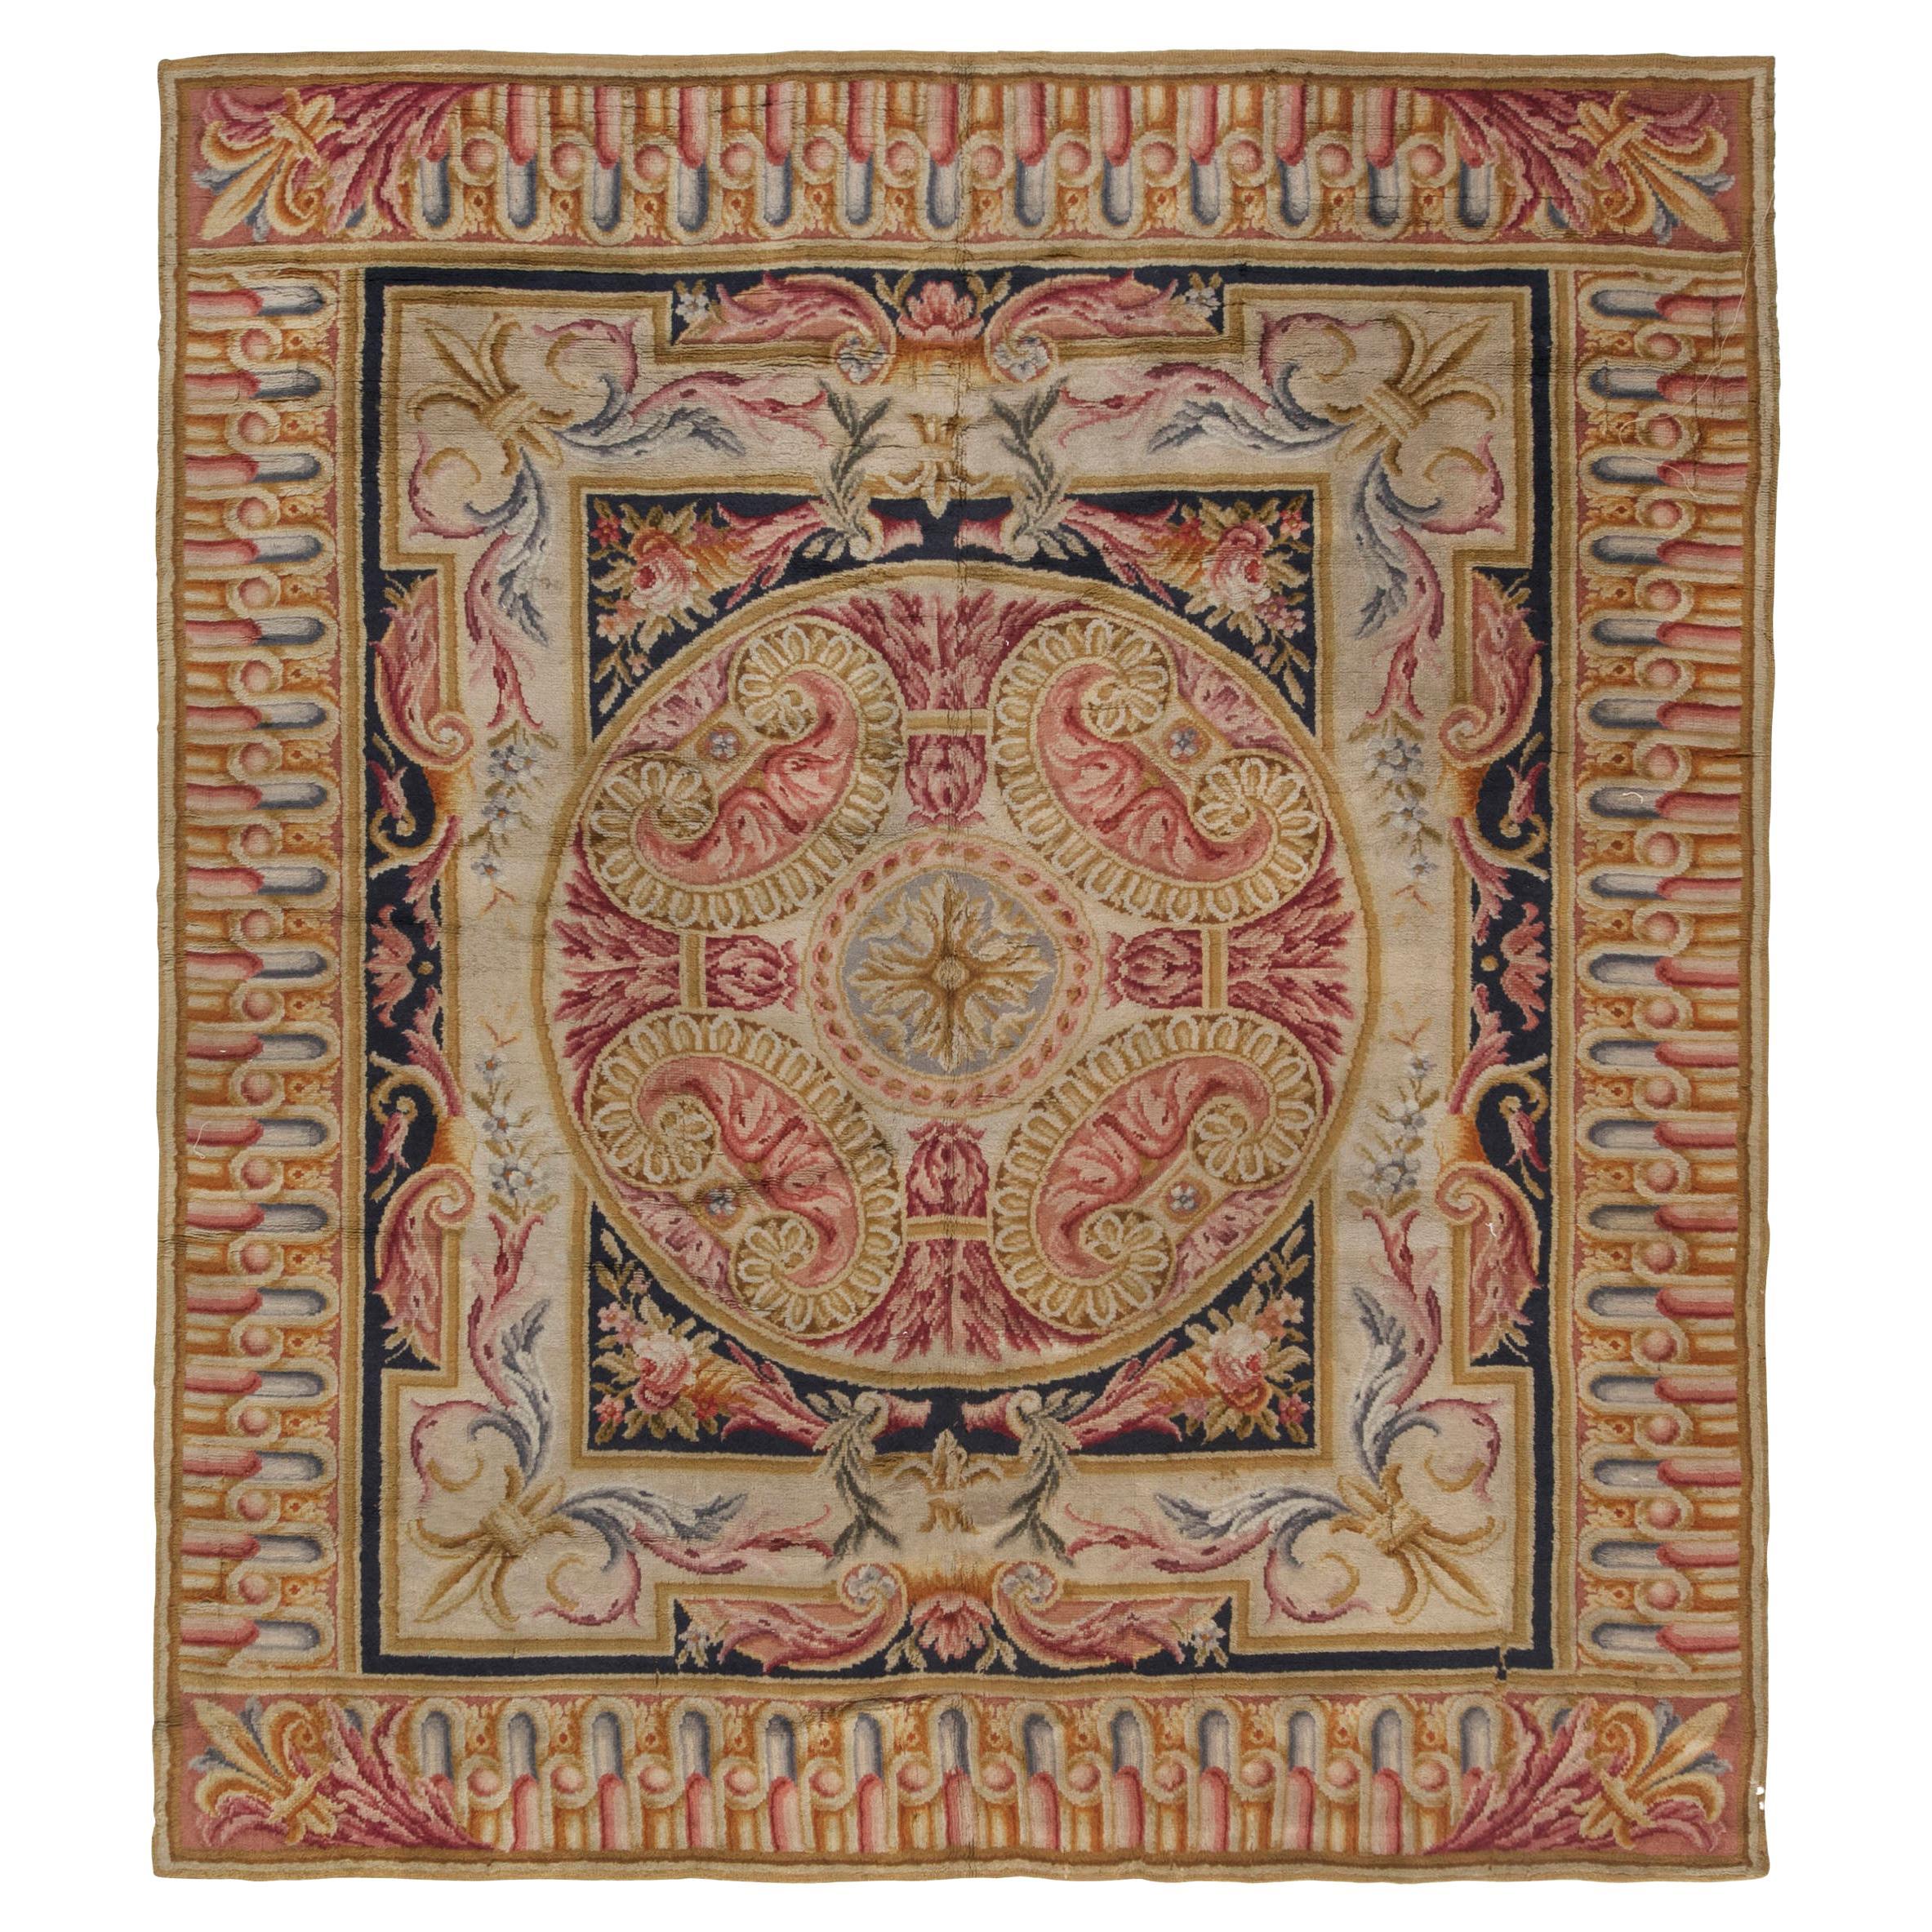 Art Nouveau Hand Knotted Carpet with Floral Design, Theo Nieuwenhuis ...